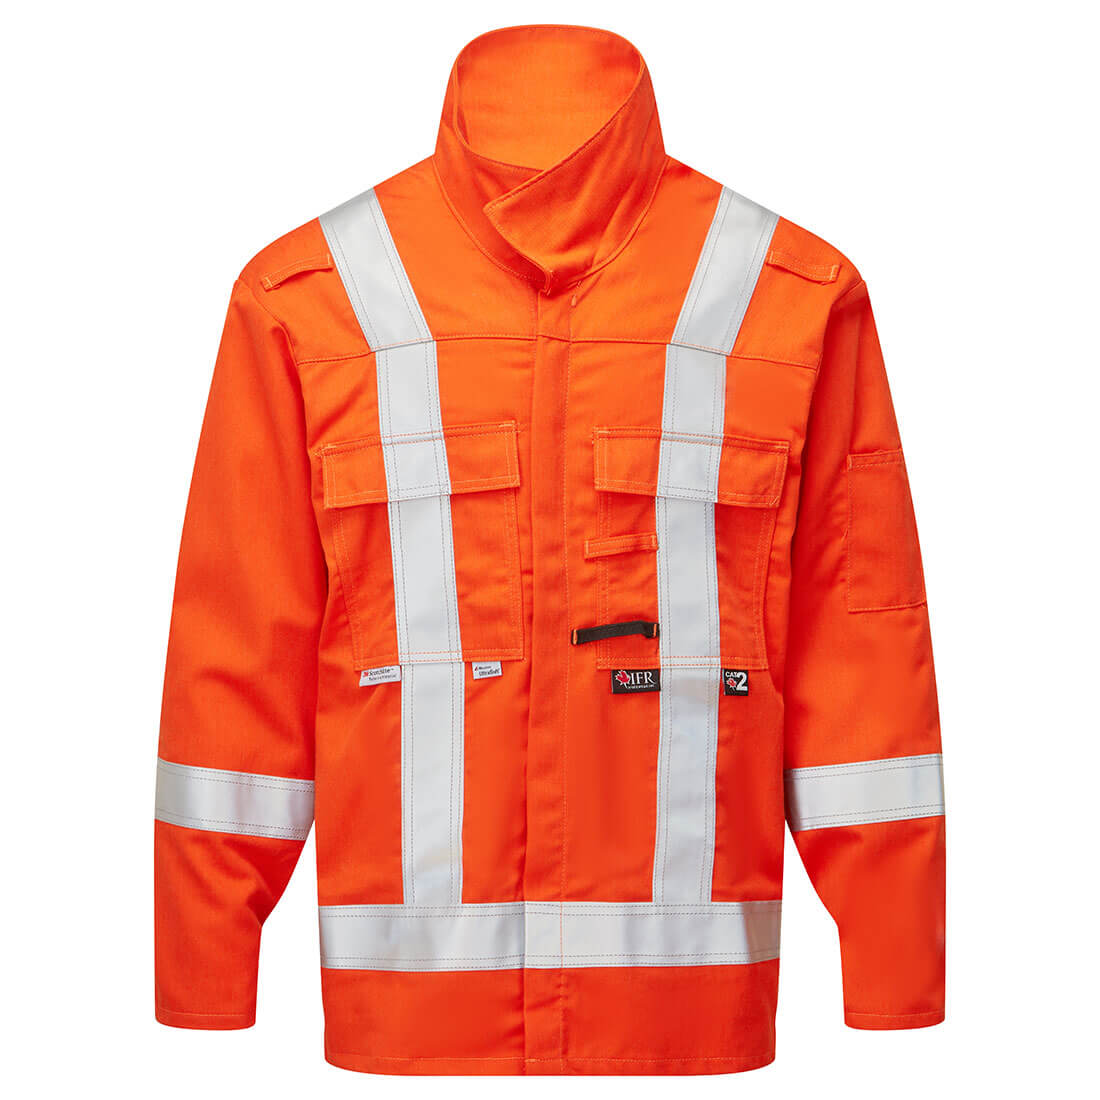 IFR Flame Resistant, Jackets